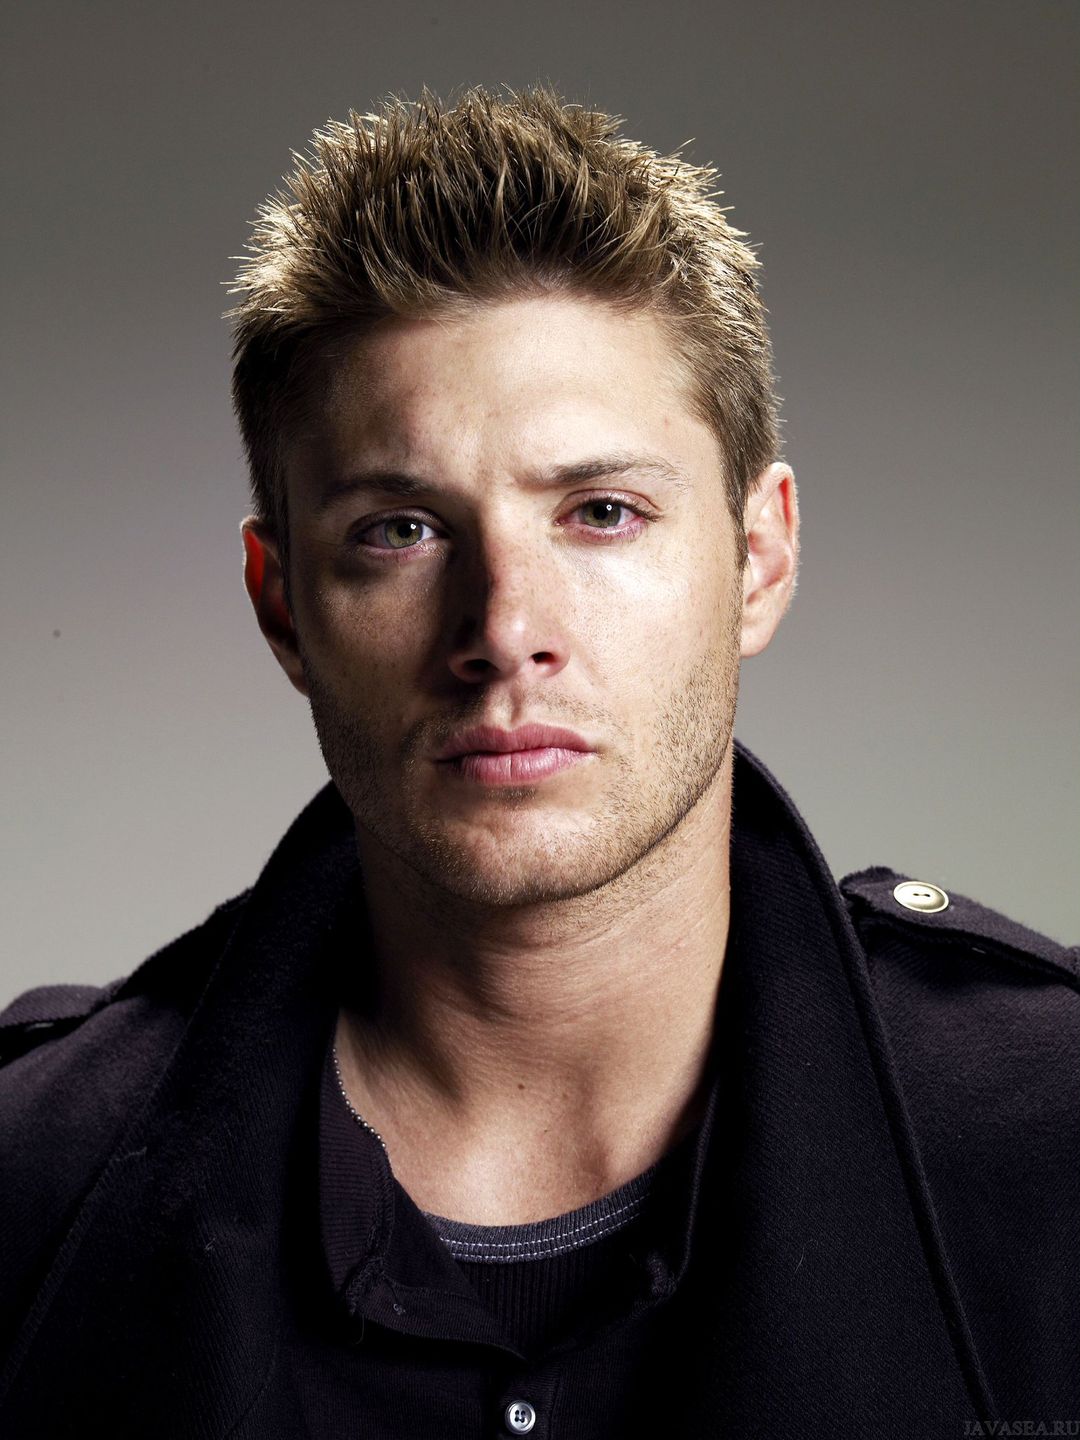 Jensen Ackles who is his father